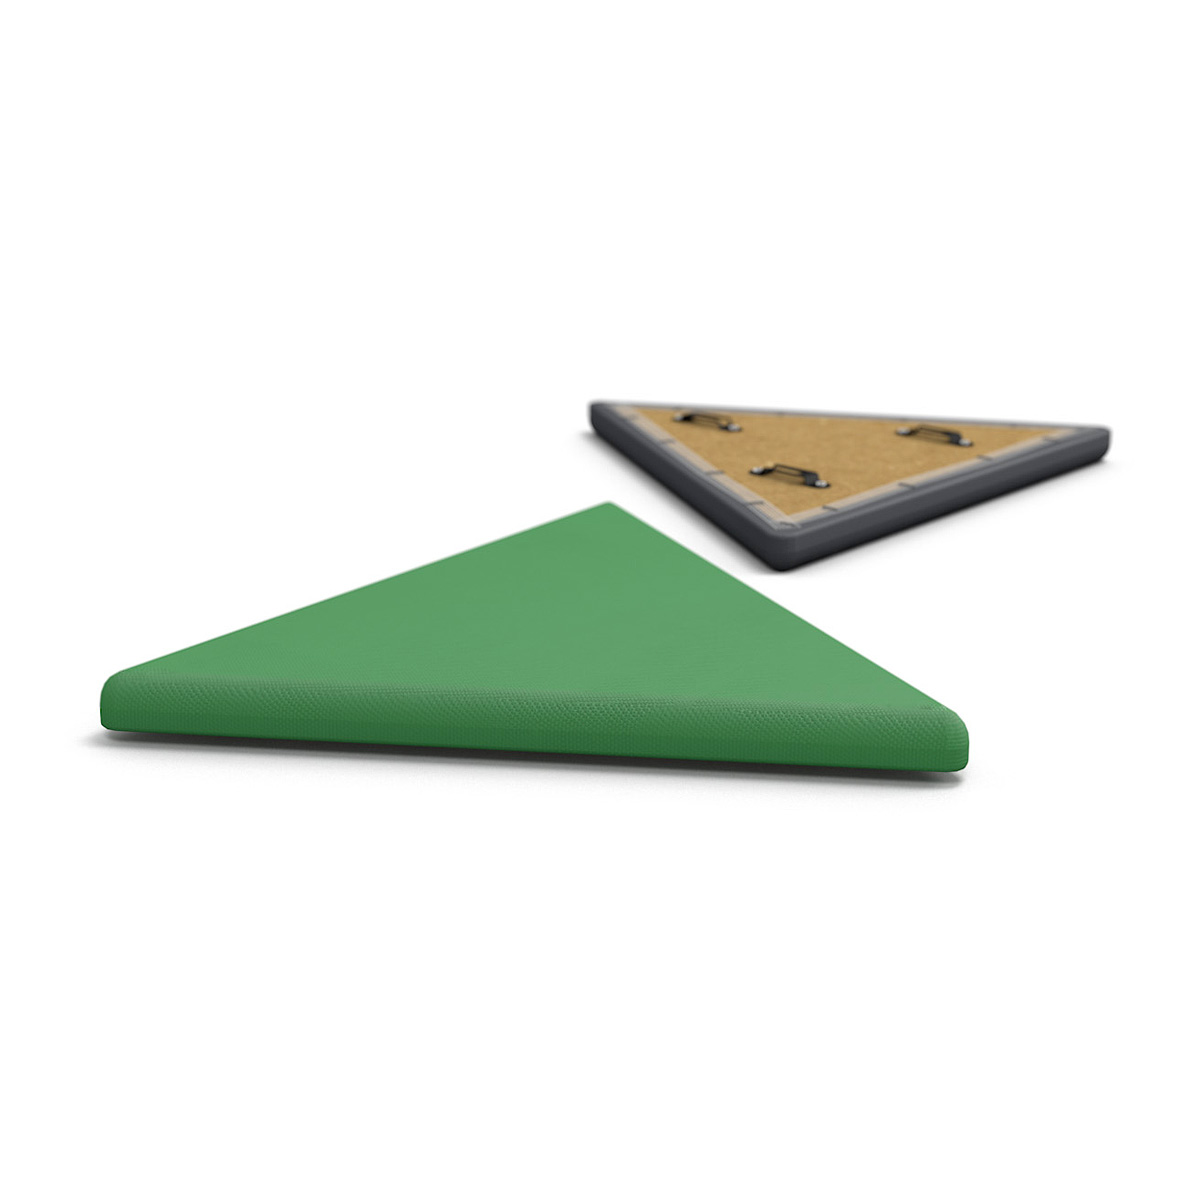 VIRAGE™ Triangular Acoustic Wall Soundproofing Panels Are 26mm Thick With 18mm Internal Acoustic Foam